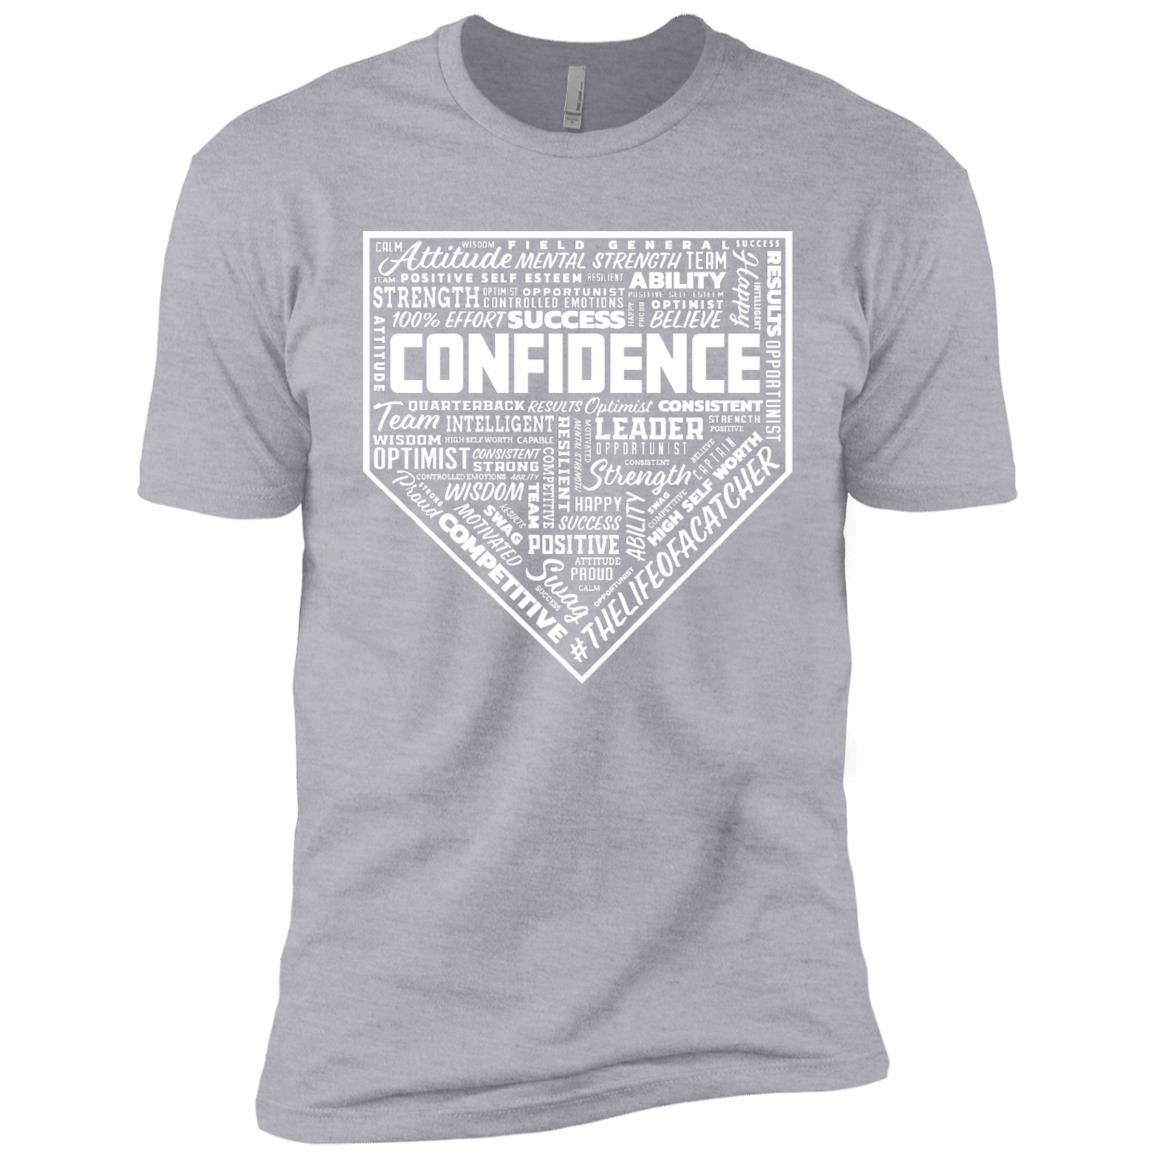 The Catching Guy Catcher Confidence Youth Tee in grey